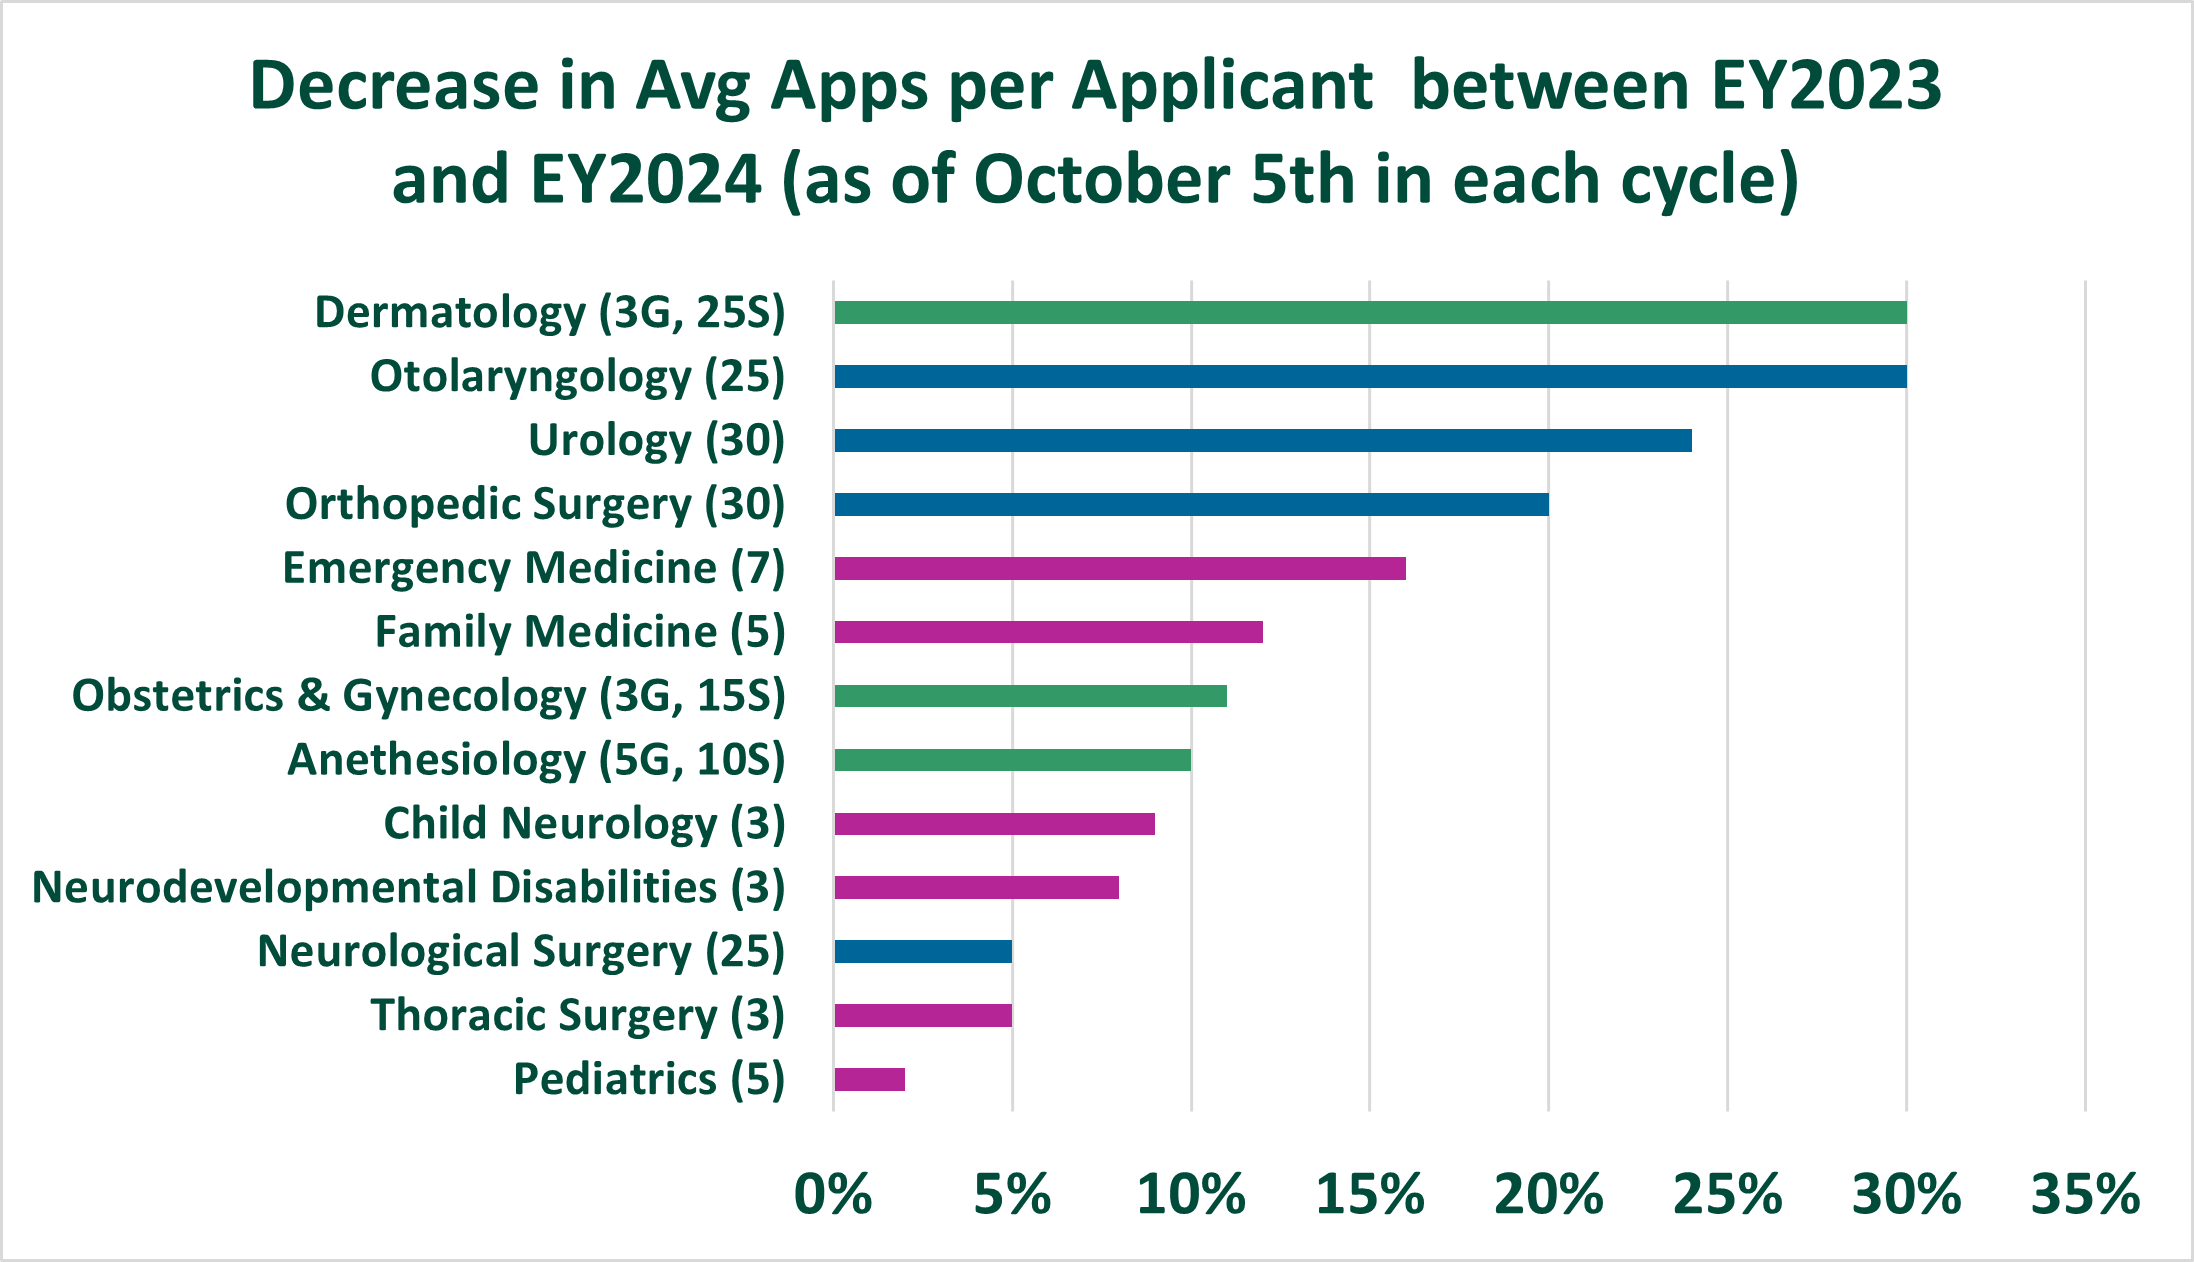 Bar chart illustrating the decrease in average applications per applicant between EY2023 and EY2024 (as if October 5th in each cycle). The specialties and their corresponding percent decrease in average applications per applicant are as follows: Dermatology (30%), Otolaryngology (30%), Urology (24%), Orthopedic Surgery (20%), Emergency Medicine (16%), Family Medicine (12%), Obstetrics and Gynecology (11%), Anesthesiology (10%), Child Neurology (9%), Neurodevelopmental Disabilities (8%), Neurological Surgery (5%), Thoracic Surgery (5%), and Pediatrics (2%).